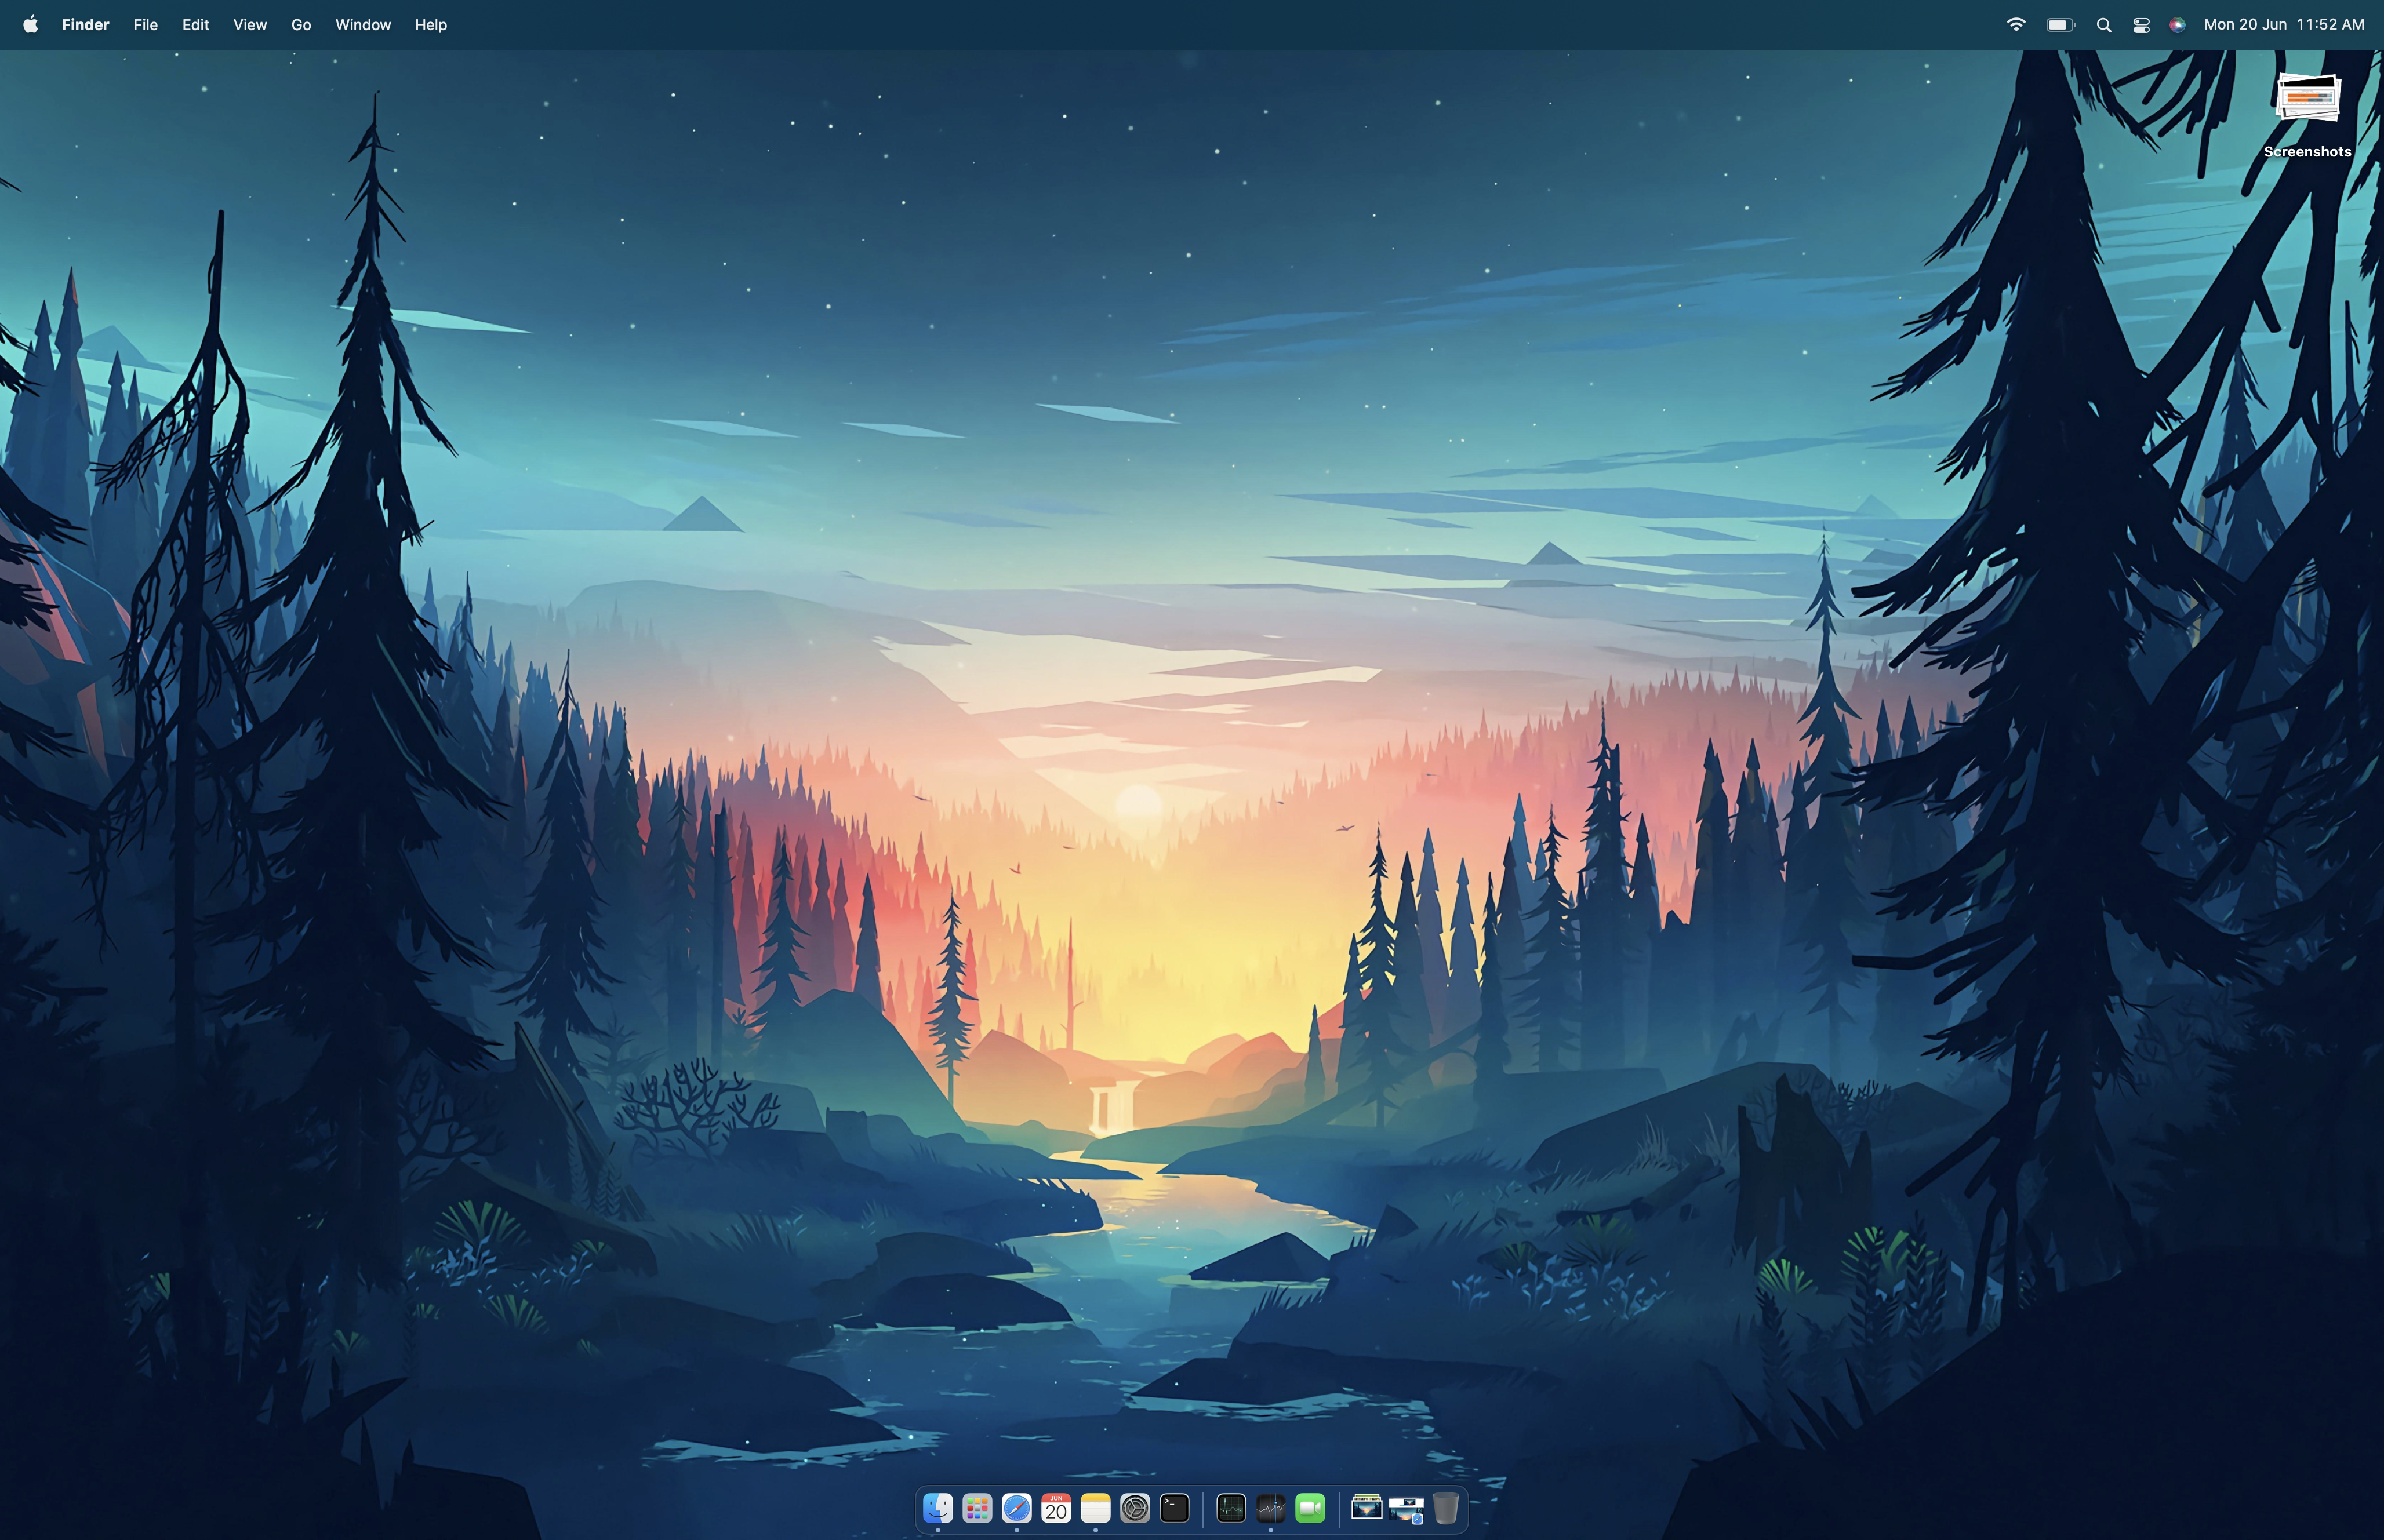 Found an awesome wallpaper that suits my Mac rmacbookpro